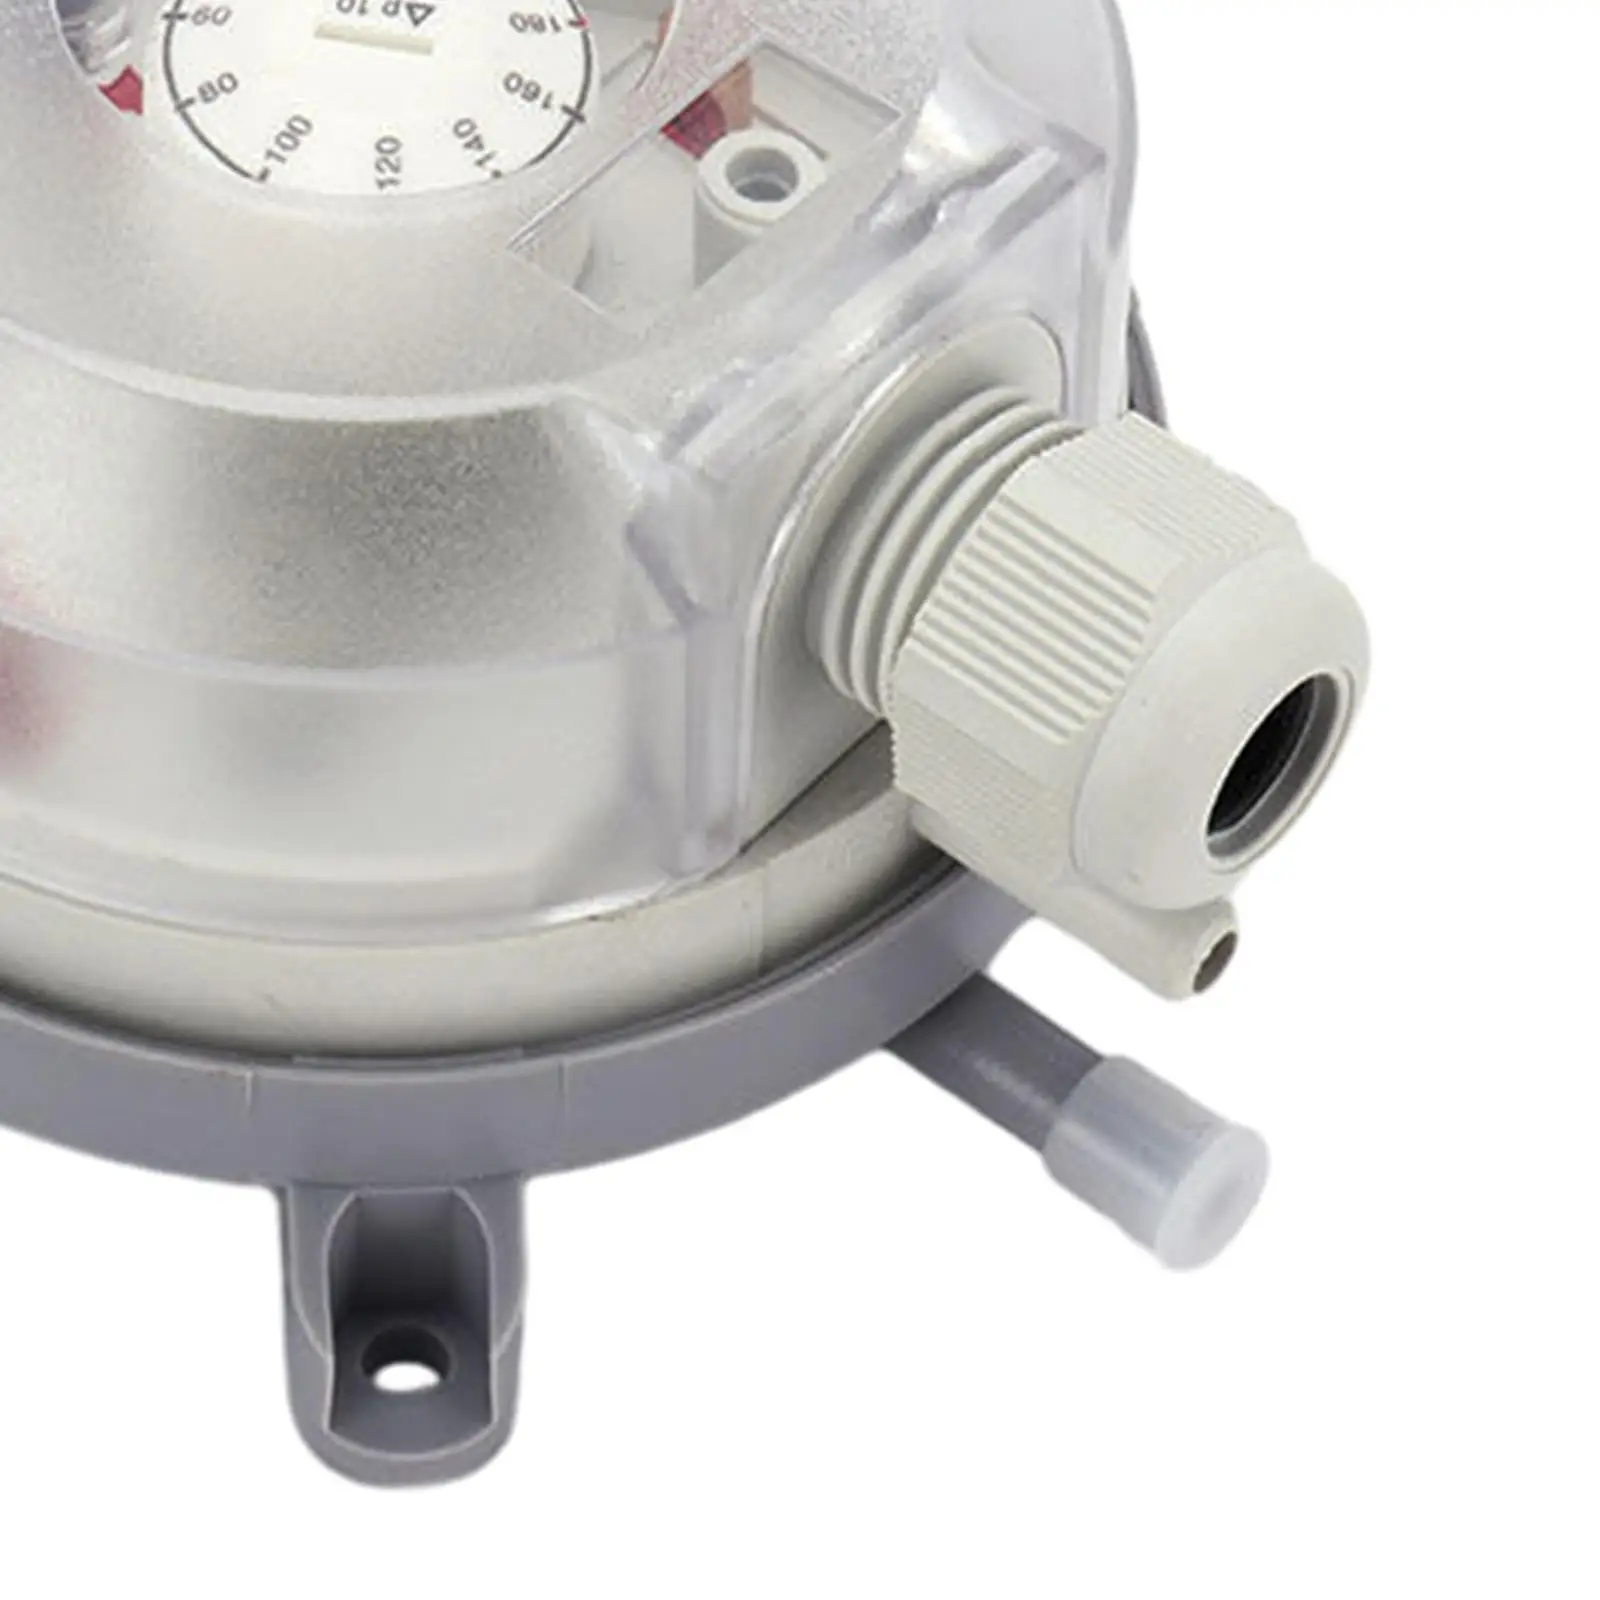 Differential Pressure Switch Mechanical Spdt 20-200PA Water Resistance Micro Air Pressure for Environmental Protection